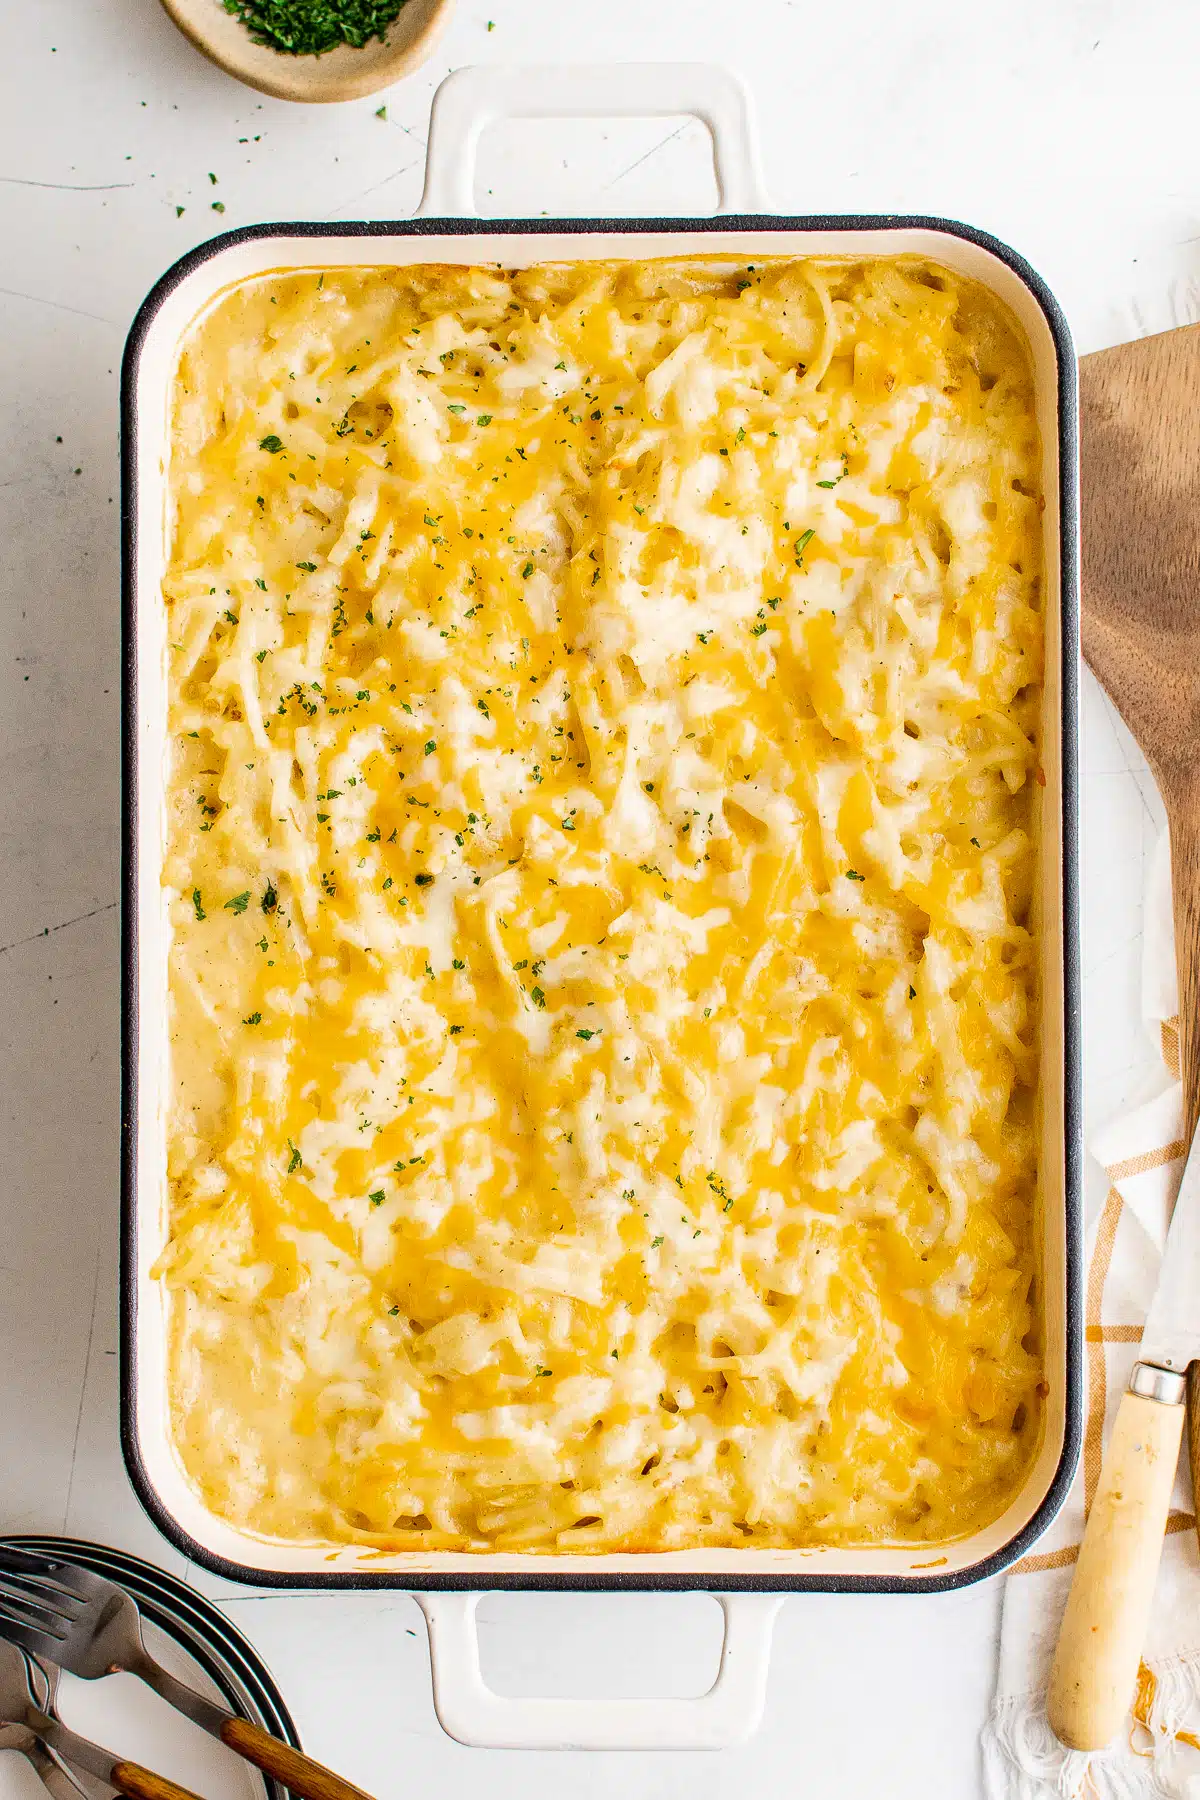 Large white baking dish filled with cheese-covered hashbrown casserole.